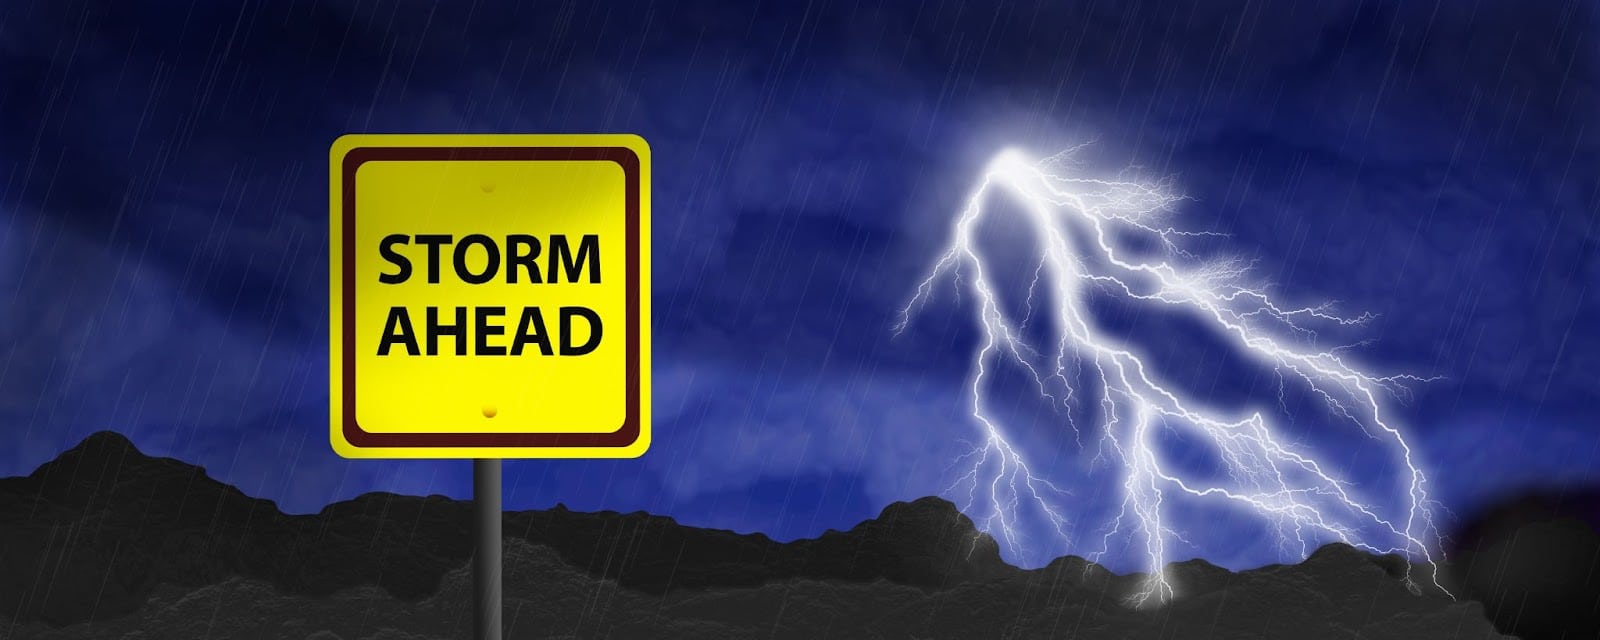 Storm ahead sign with lightning bolt, indicating severe thunderstorm warning and need for lightning storm preparation.